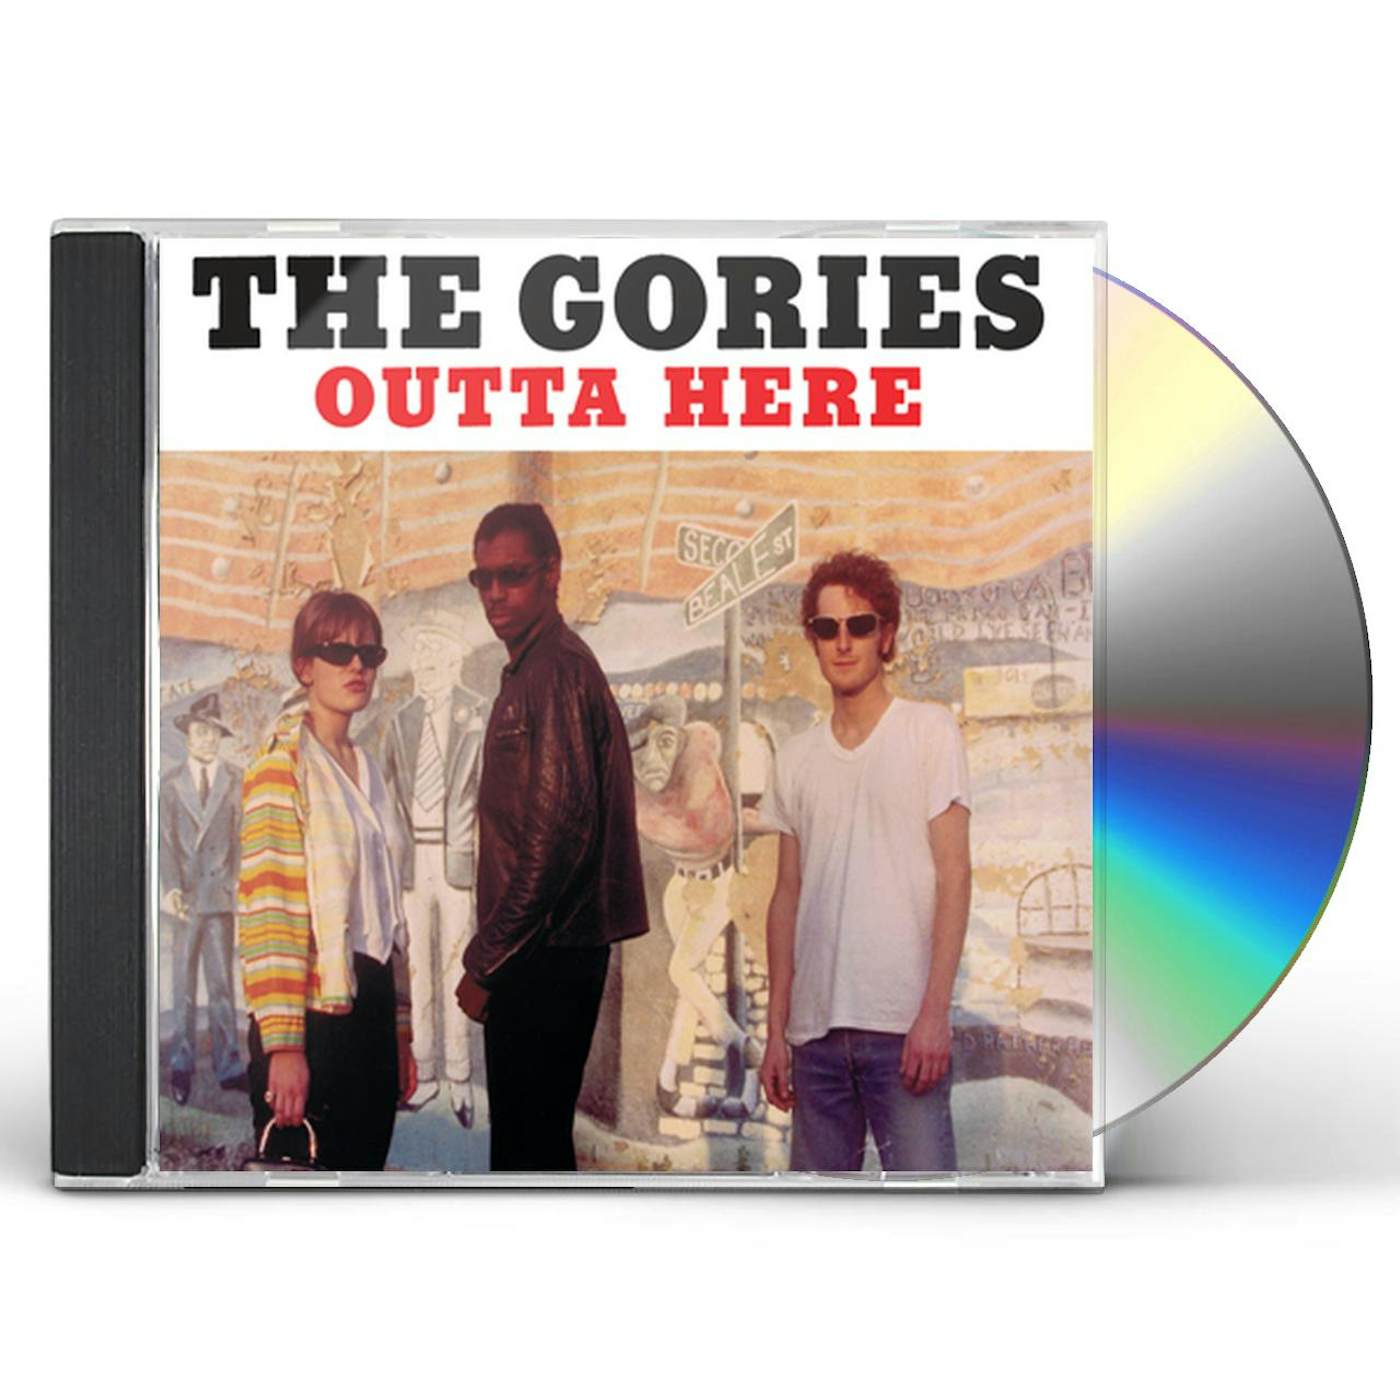 The Gories OUTTA HERE CD